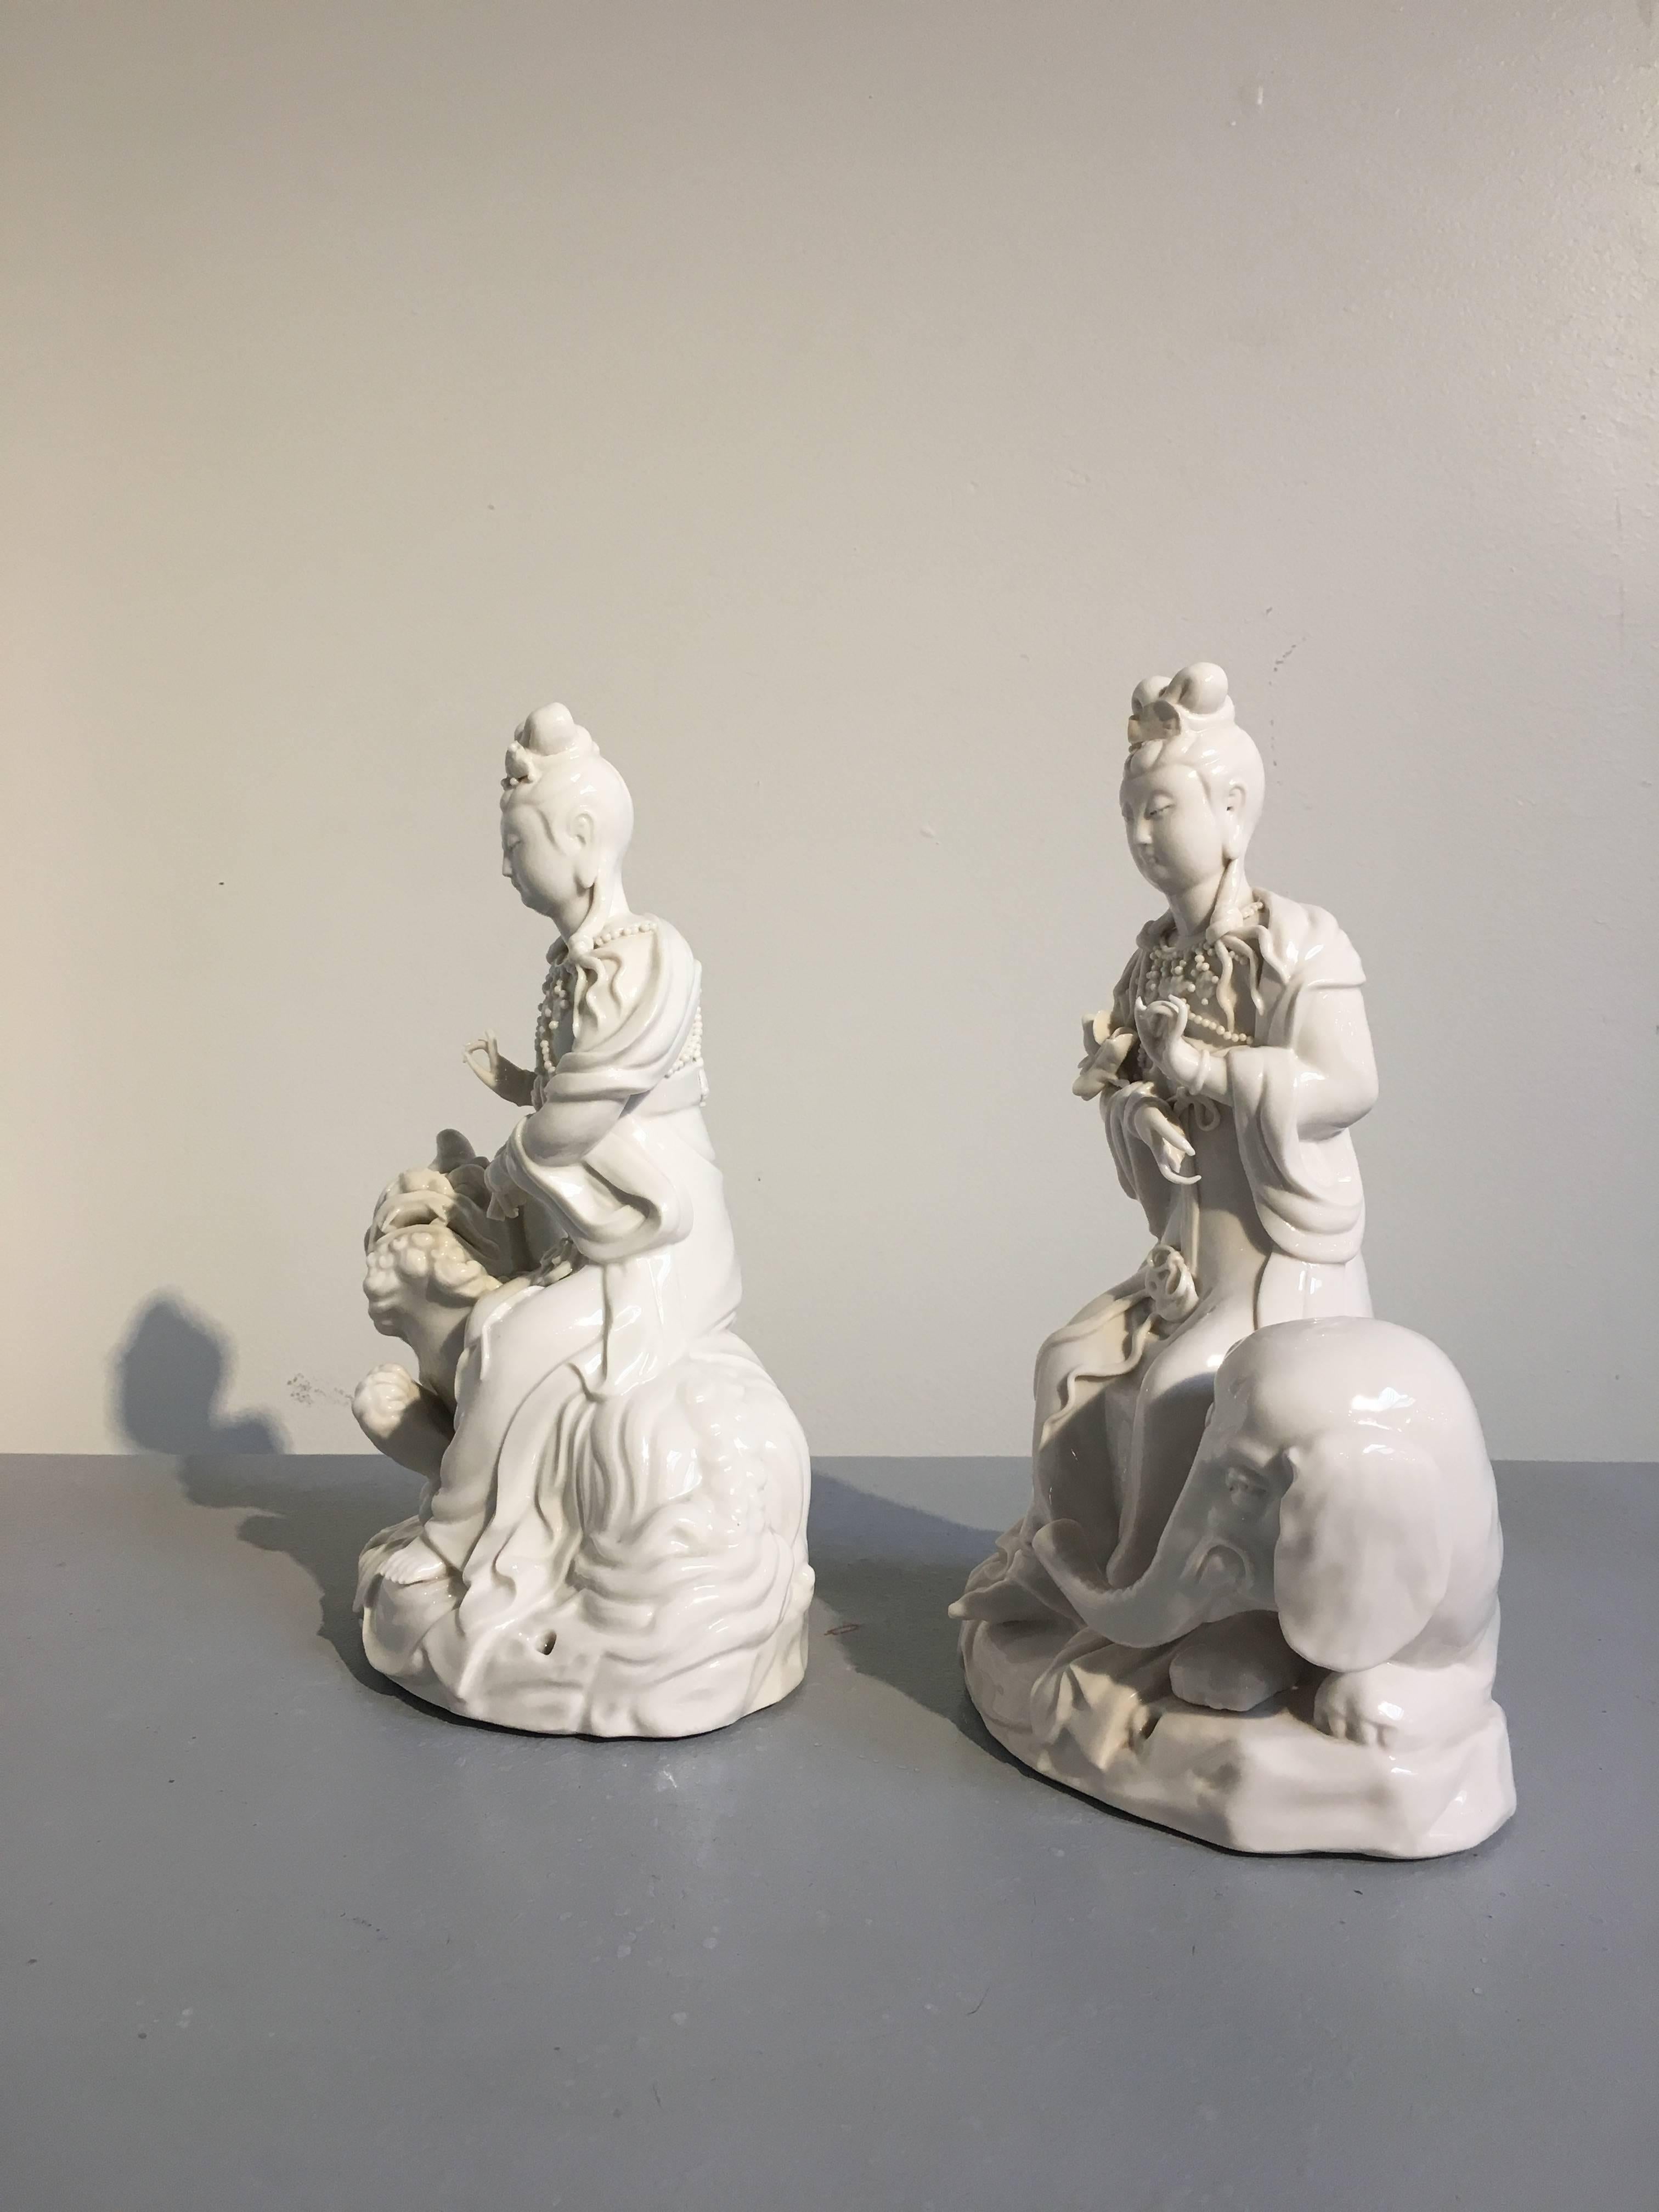 Pair of Vintage Blanc de Chine Figures of Guanyin Riding an Elephant and Lion In Good Condition For Sale In Austin, TX